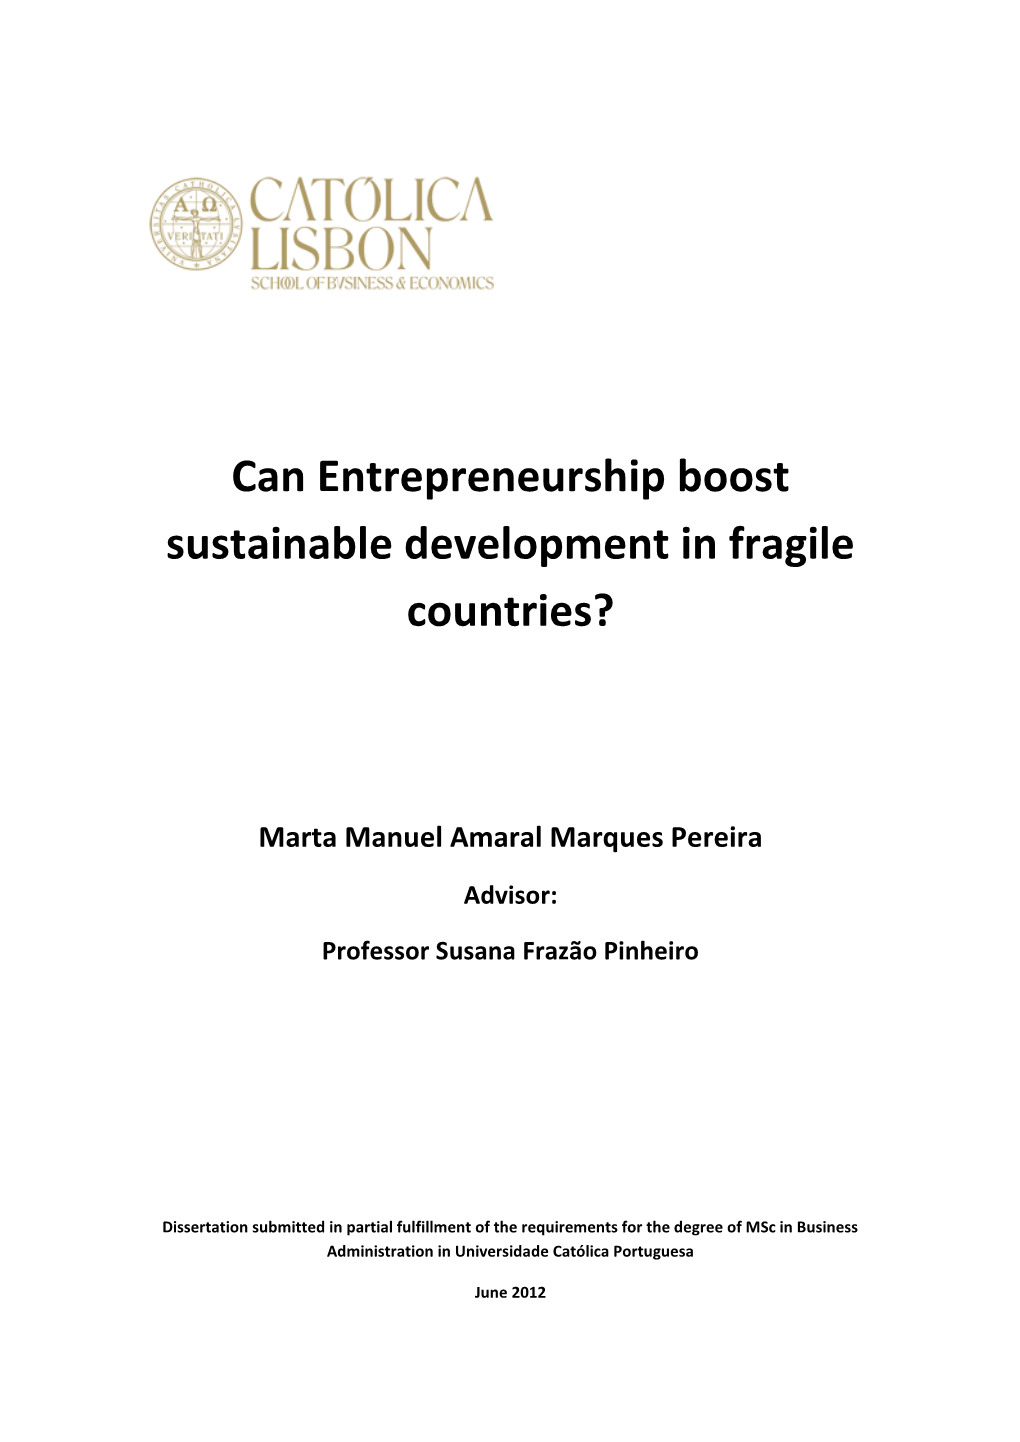 Can Entrepreneurship Boost Sustainable Development in Fragile Countries?